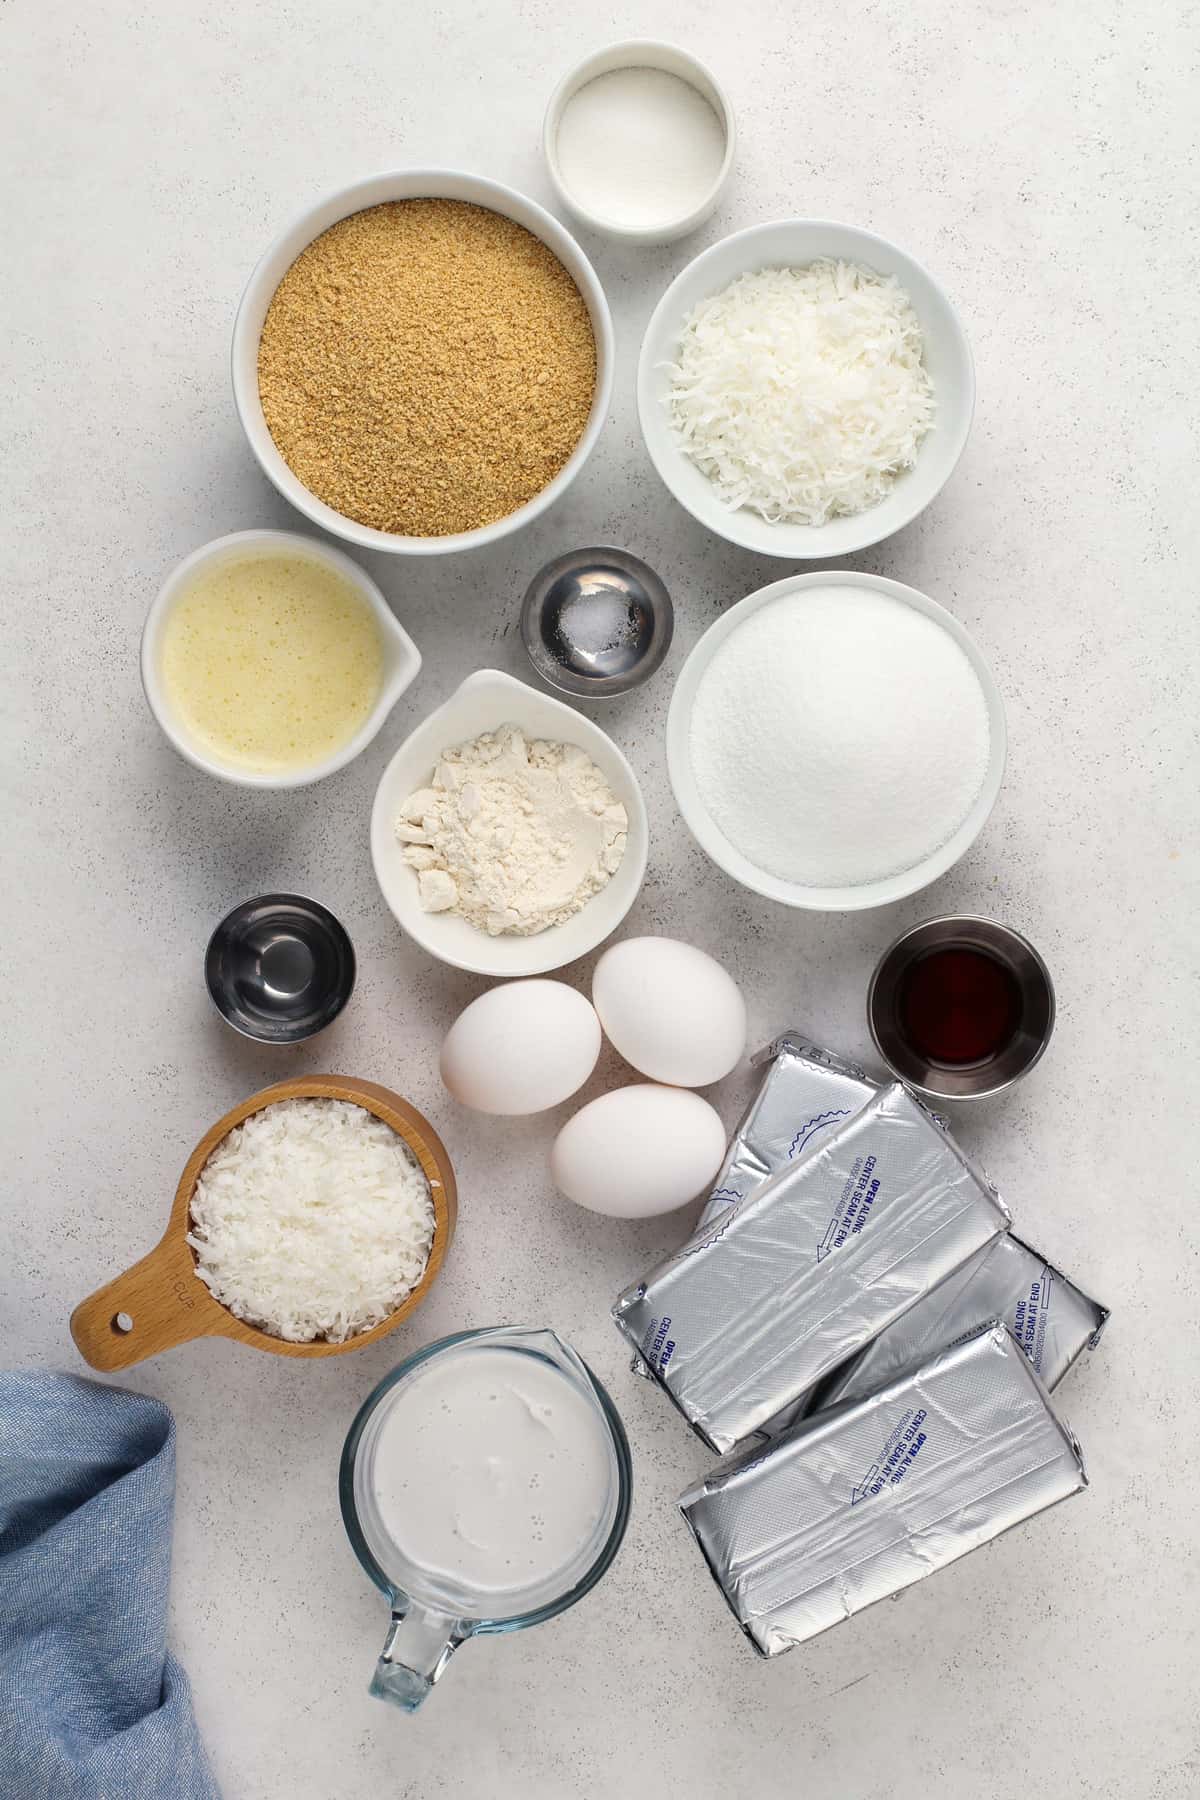 Coconut cheesecake ingredients arranged on a countertop.